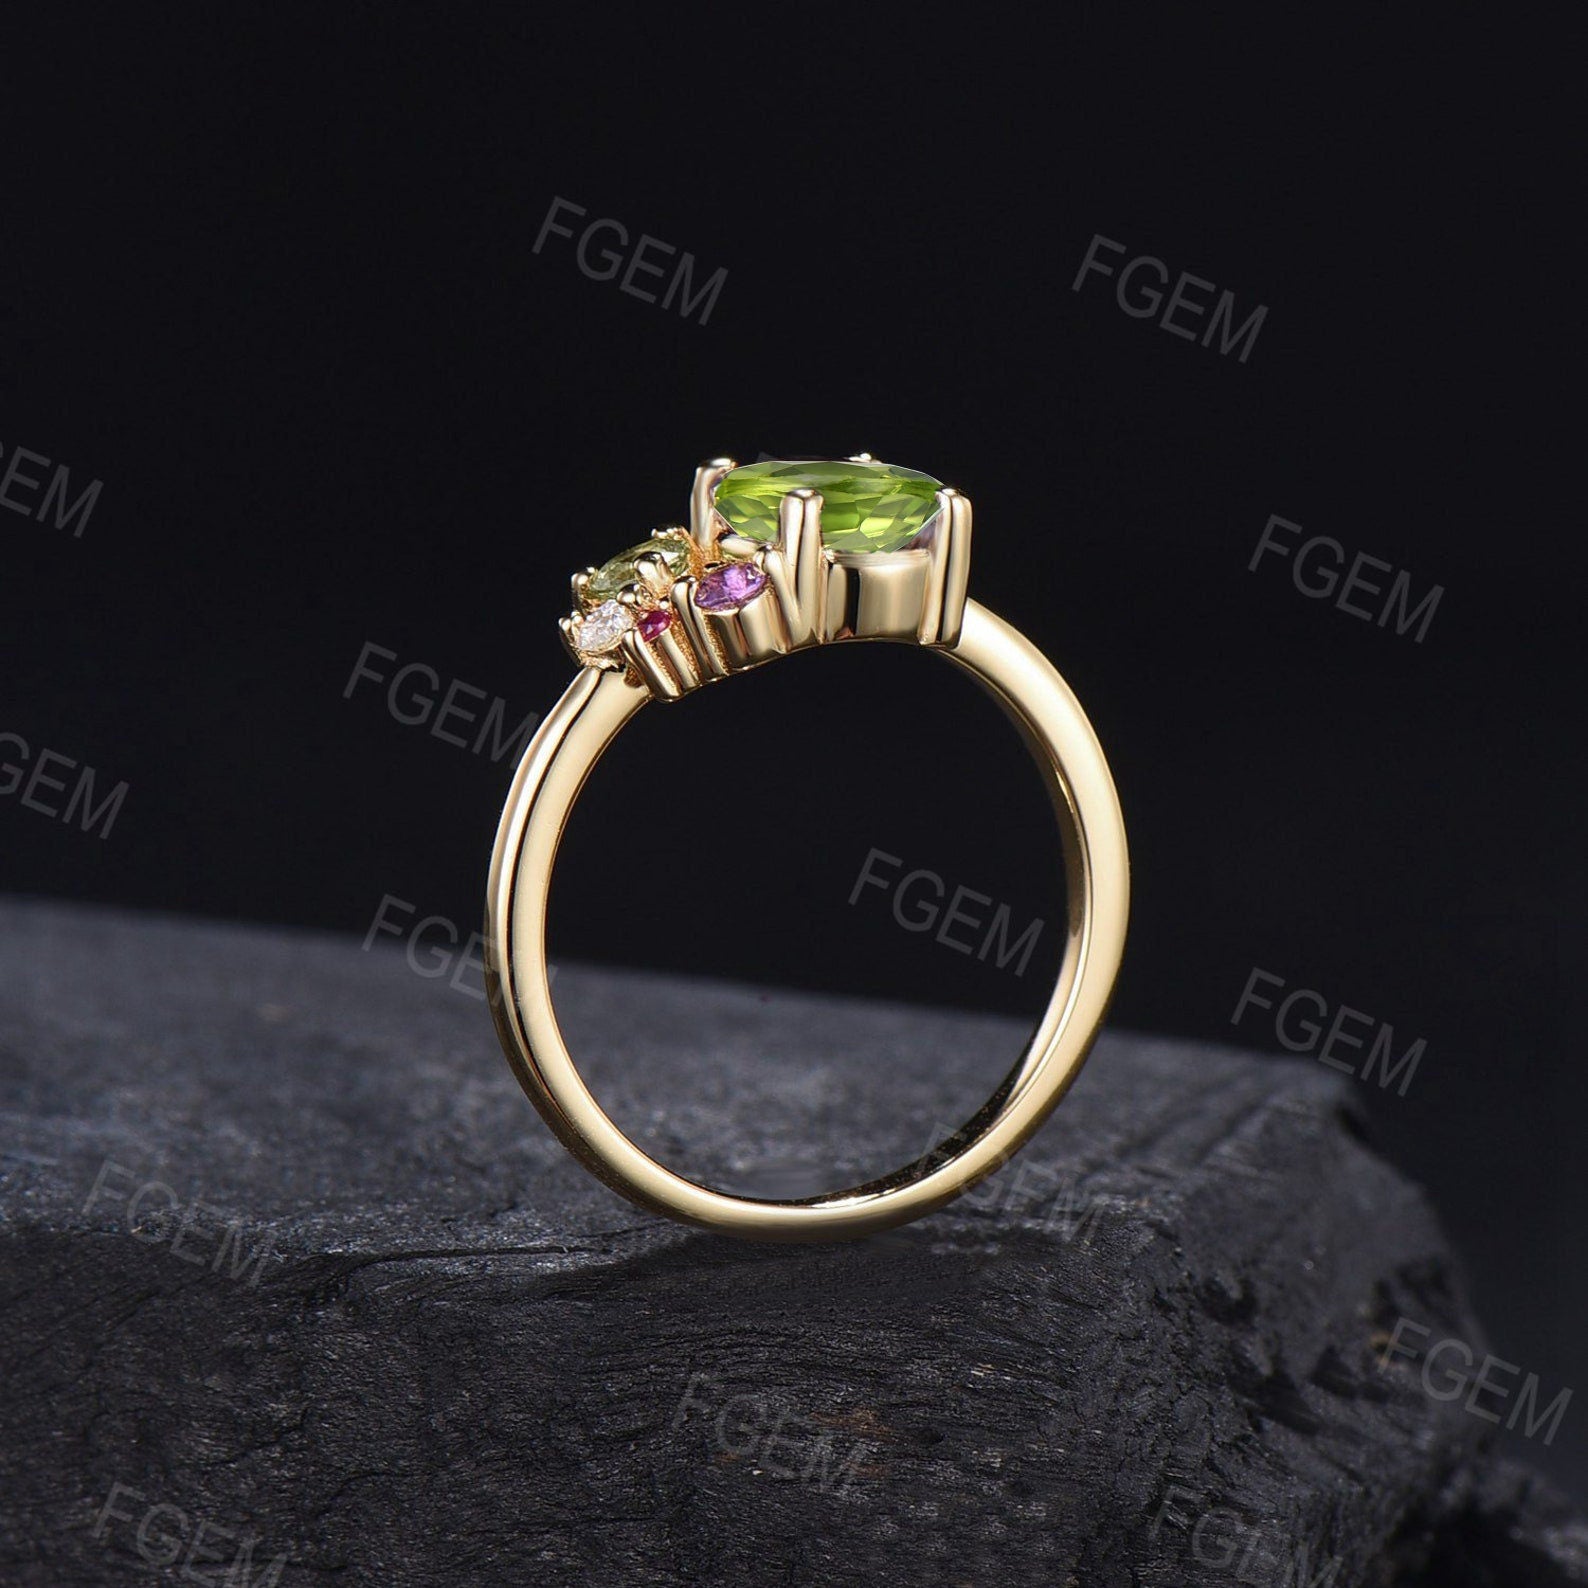 1.5ct Oval Cut Natural August Birthstone Wedding Ring Vintage Green Peridot Cluster Engagement Ring Multi Birthstone Ring Personalized Gift